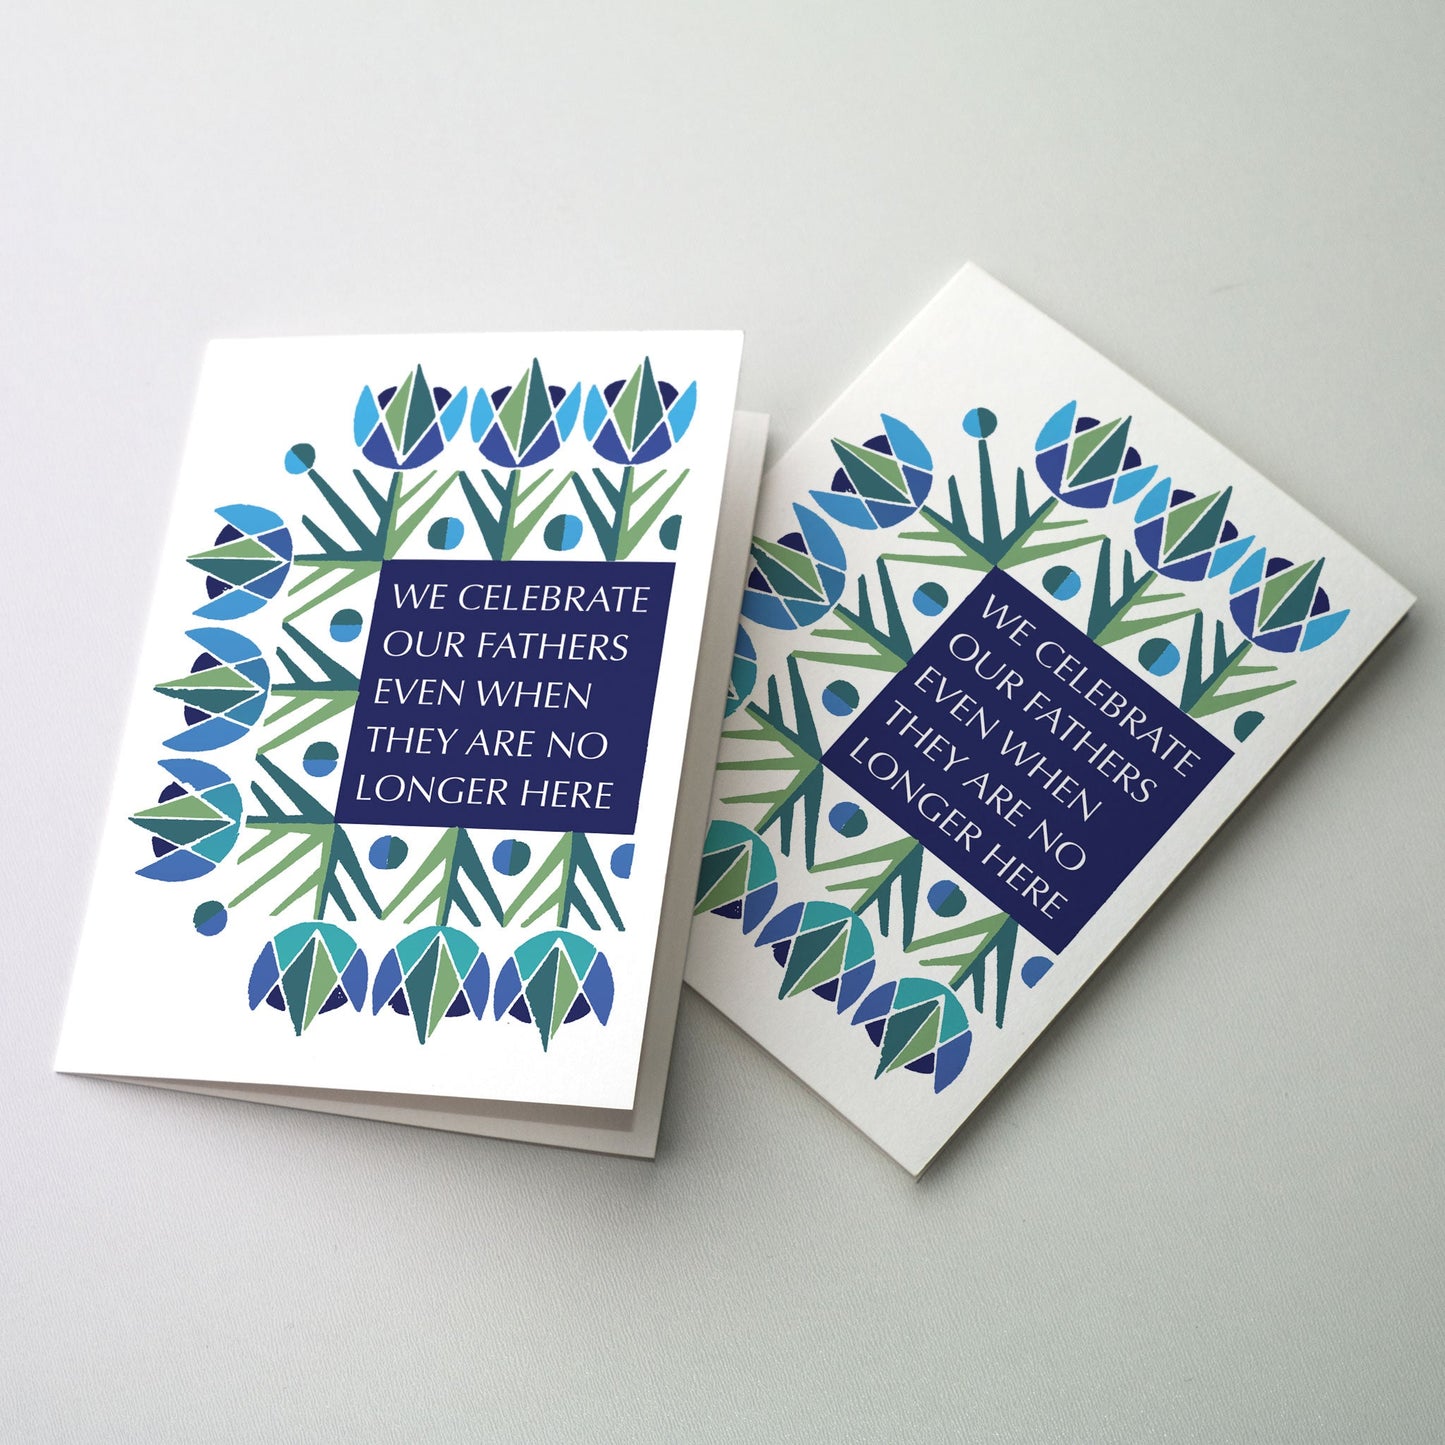 Masculine floral pattern with cover lettering. This Father&#39;s Day remembrance or sympathy card is intended to be given to a person whose father has died, who may find that Father&#39;s Day raises difficult or sad memories.